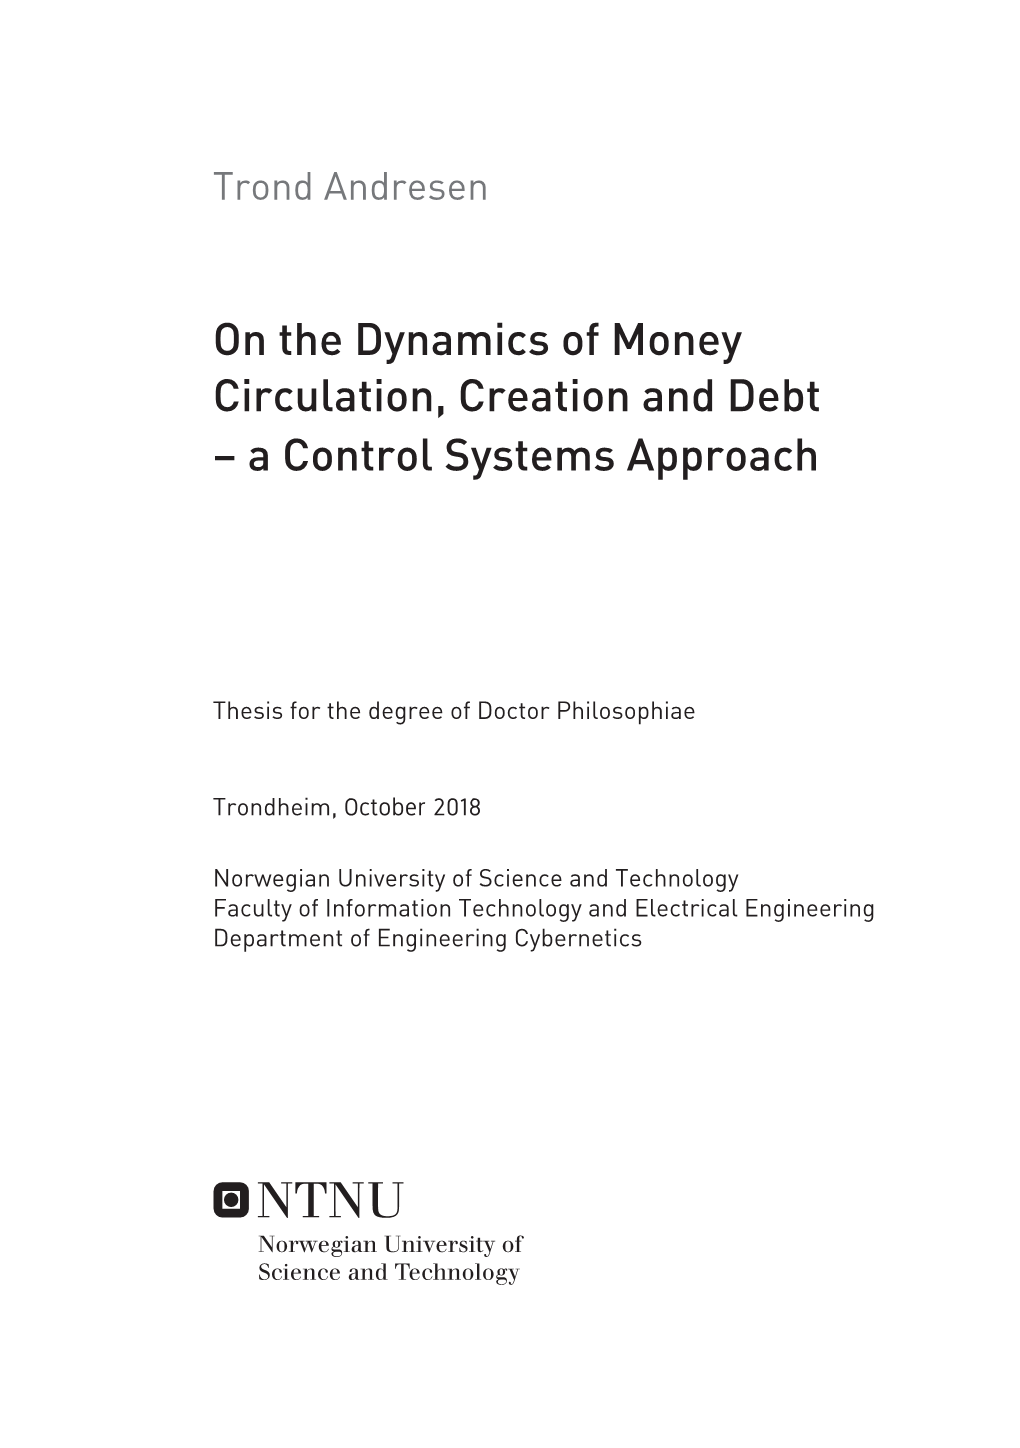 On the Dynamics of Money Circulation, Creation and Debt – a Control Systems Approach